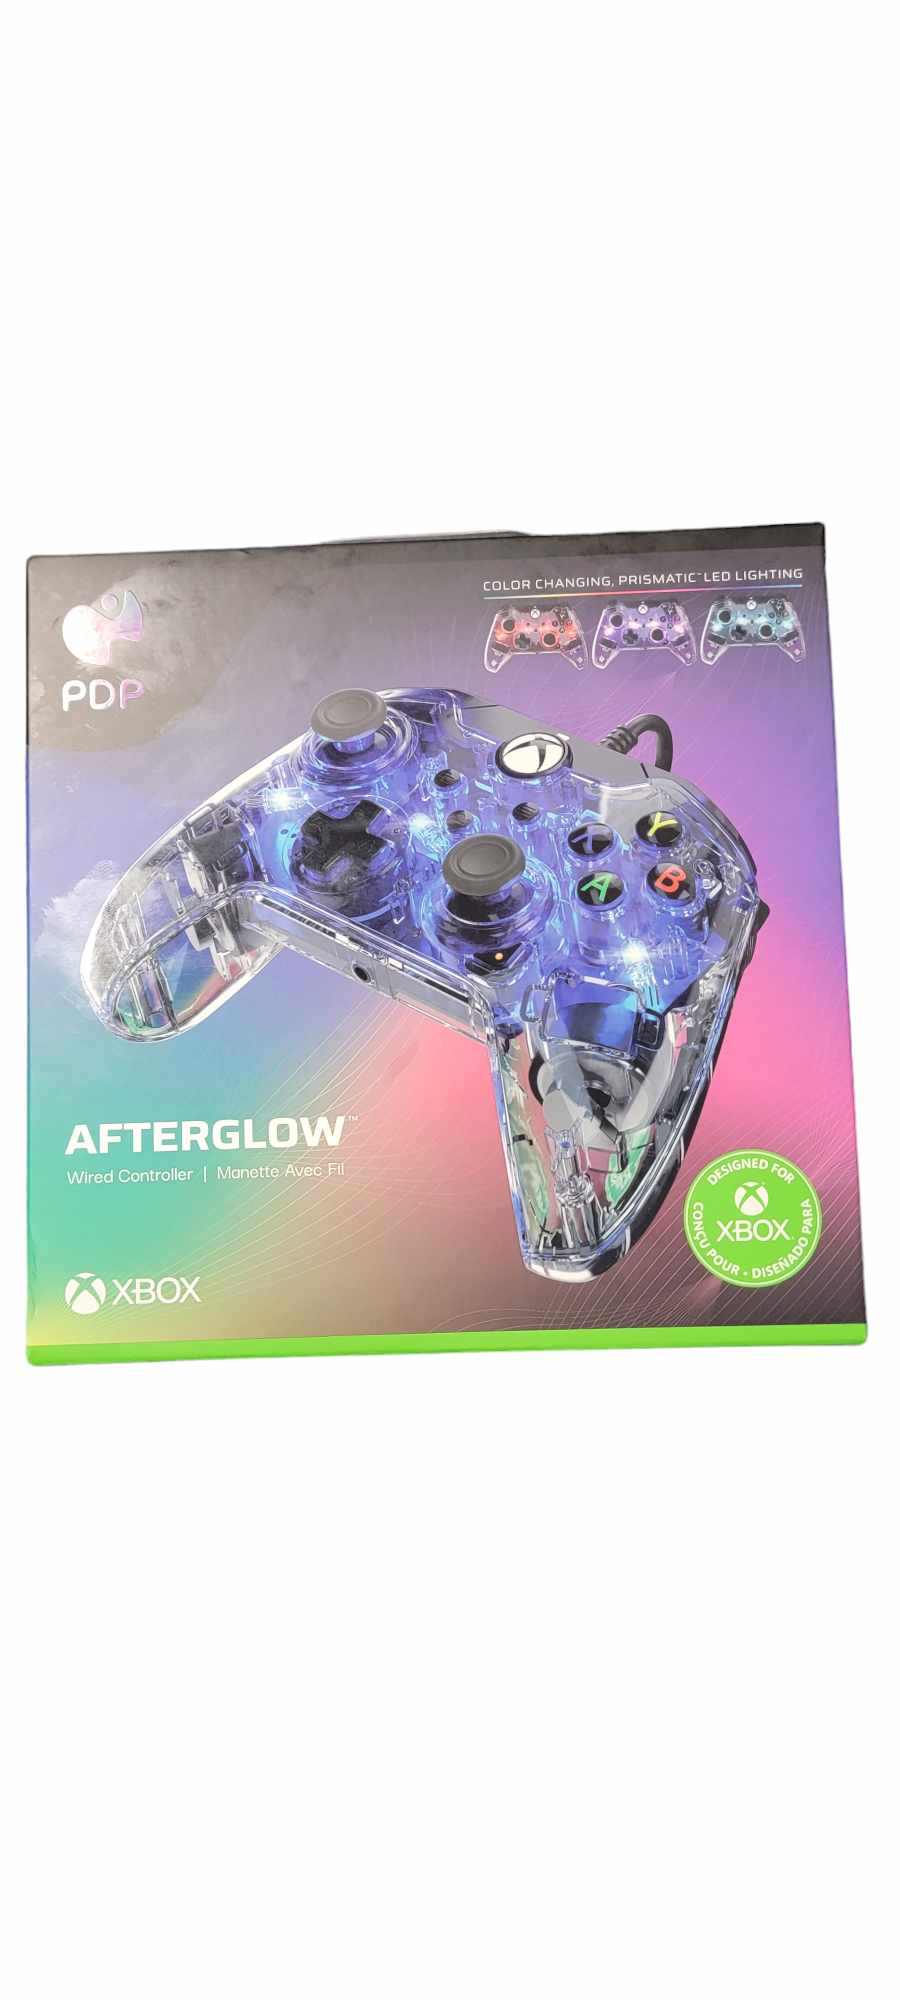 PDP Afterglow Controller Xbox One